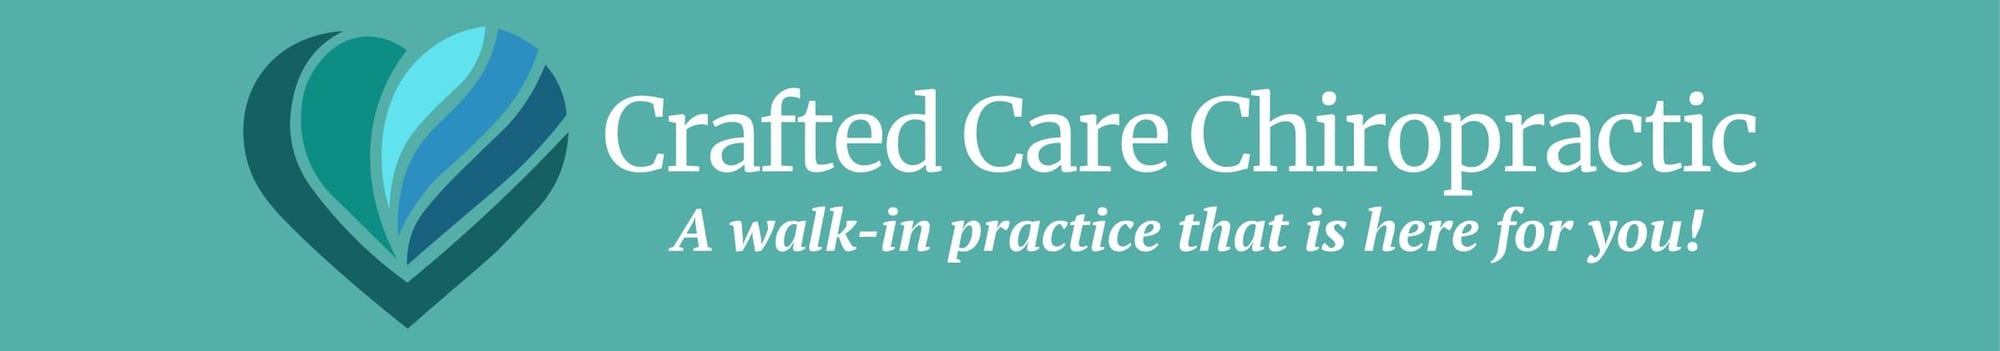 Crafted Care Chiropractic blue heart logo and slogan that says "A walk-in practice that is here for you!"